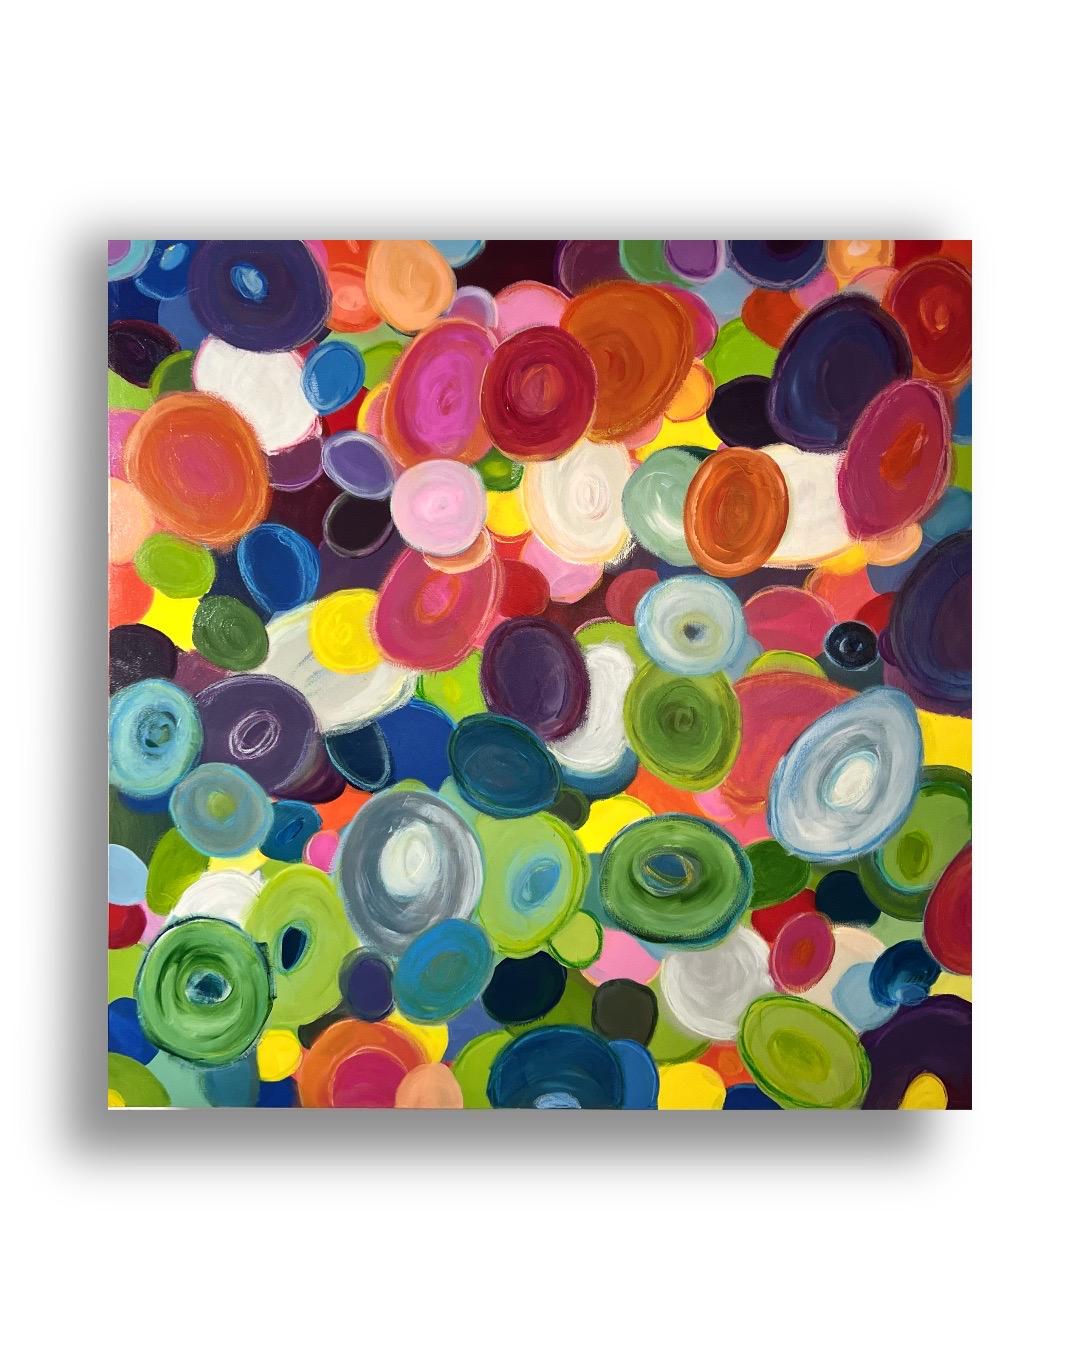 Running in Circles (Abstract, Pattern, Red, Green, Blue, Orange, Yellow) - Painting by Kelley Carman